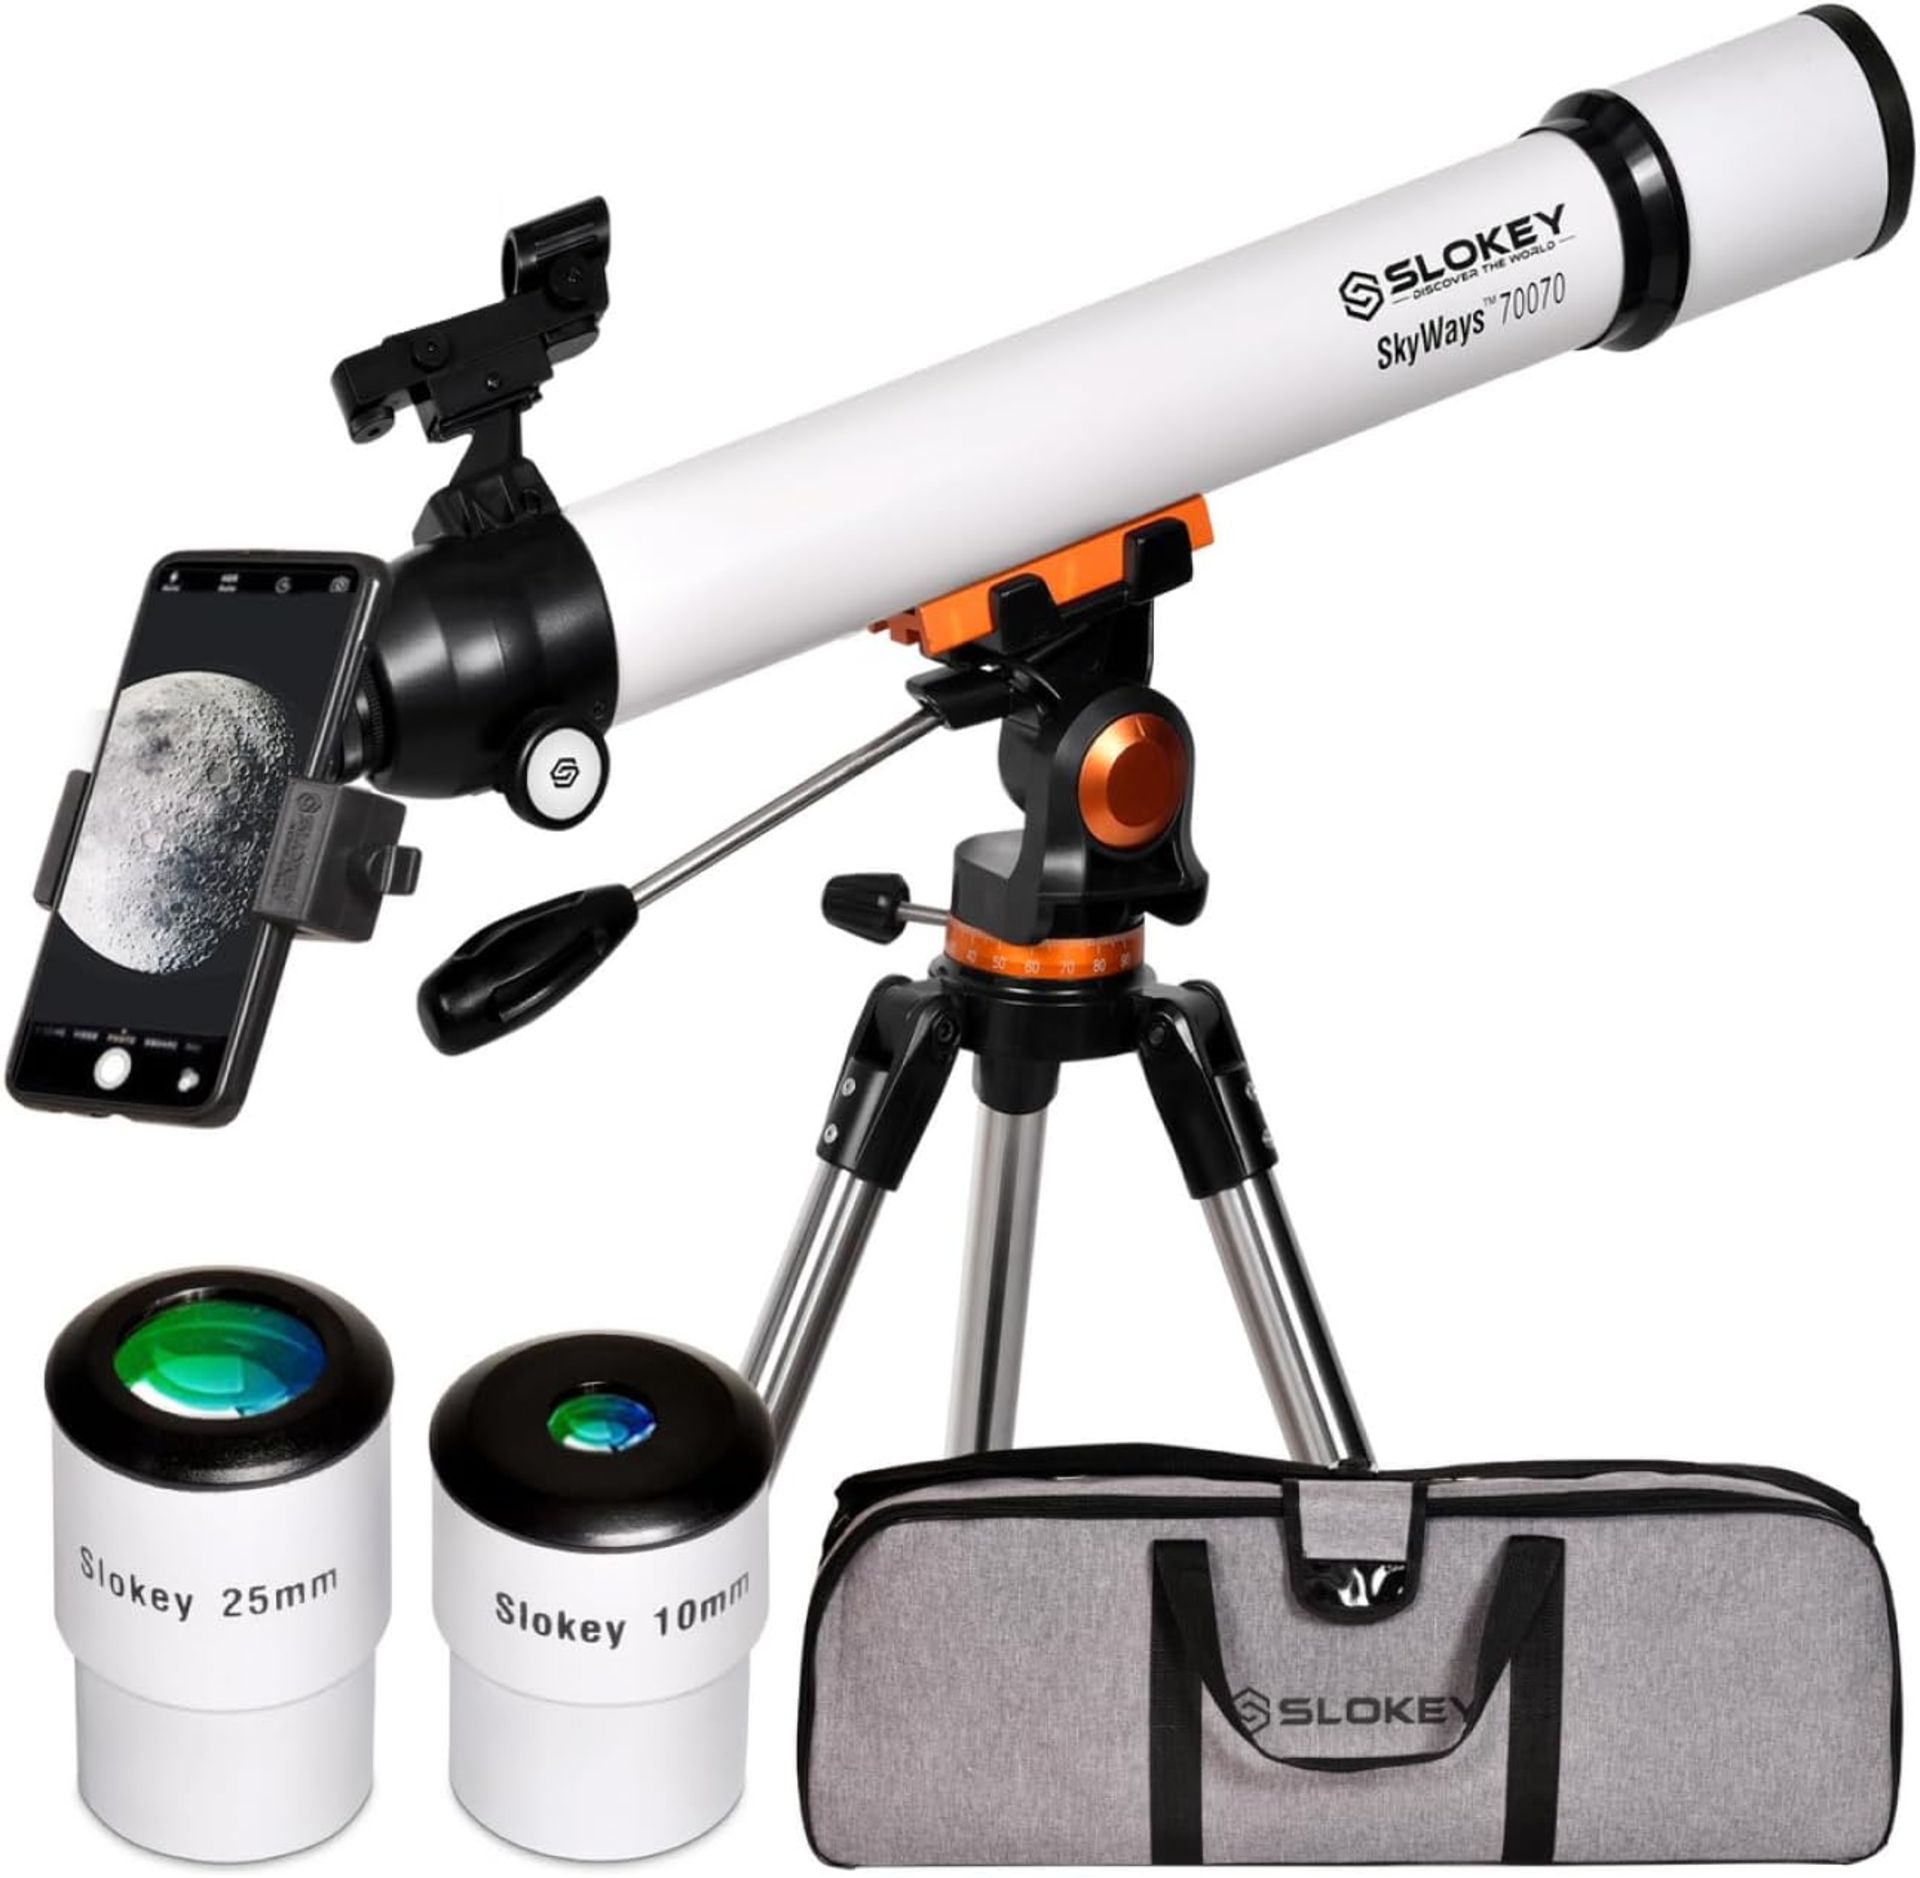 Slokey 70070 SKYWAYS TELESCOPE FOR ASTRONOMY WITH ACCESSORIES (NEW) - AMAZON RRP Â£159.99 - Image 2 of 10